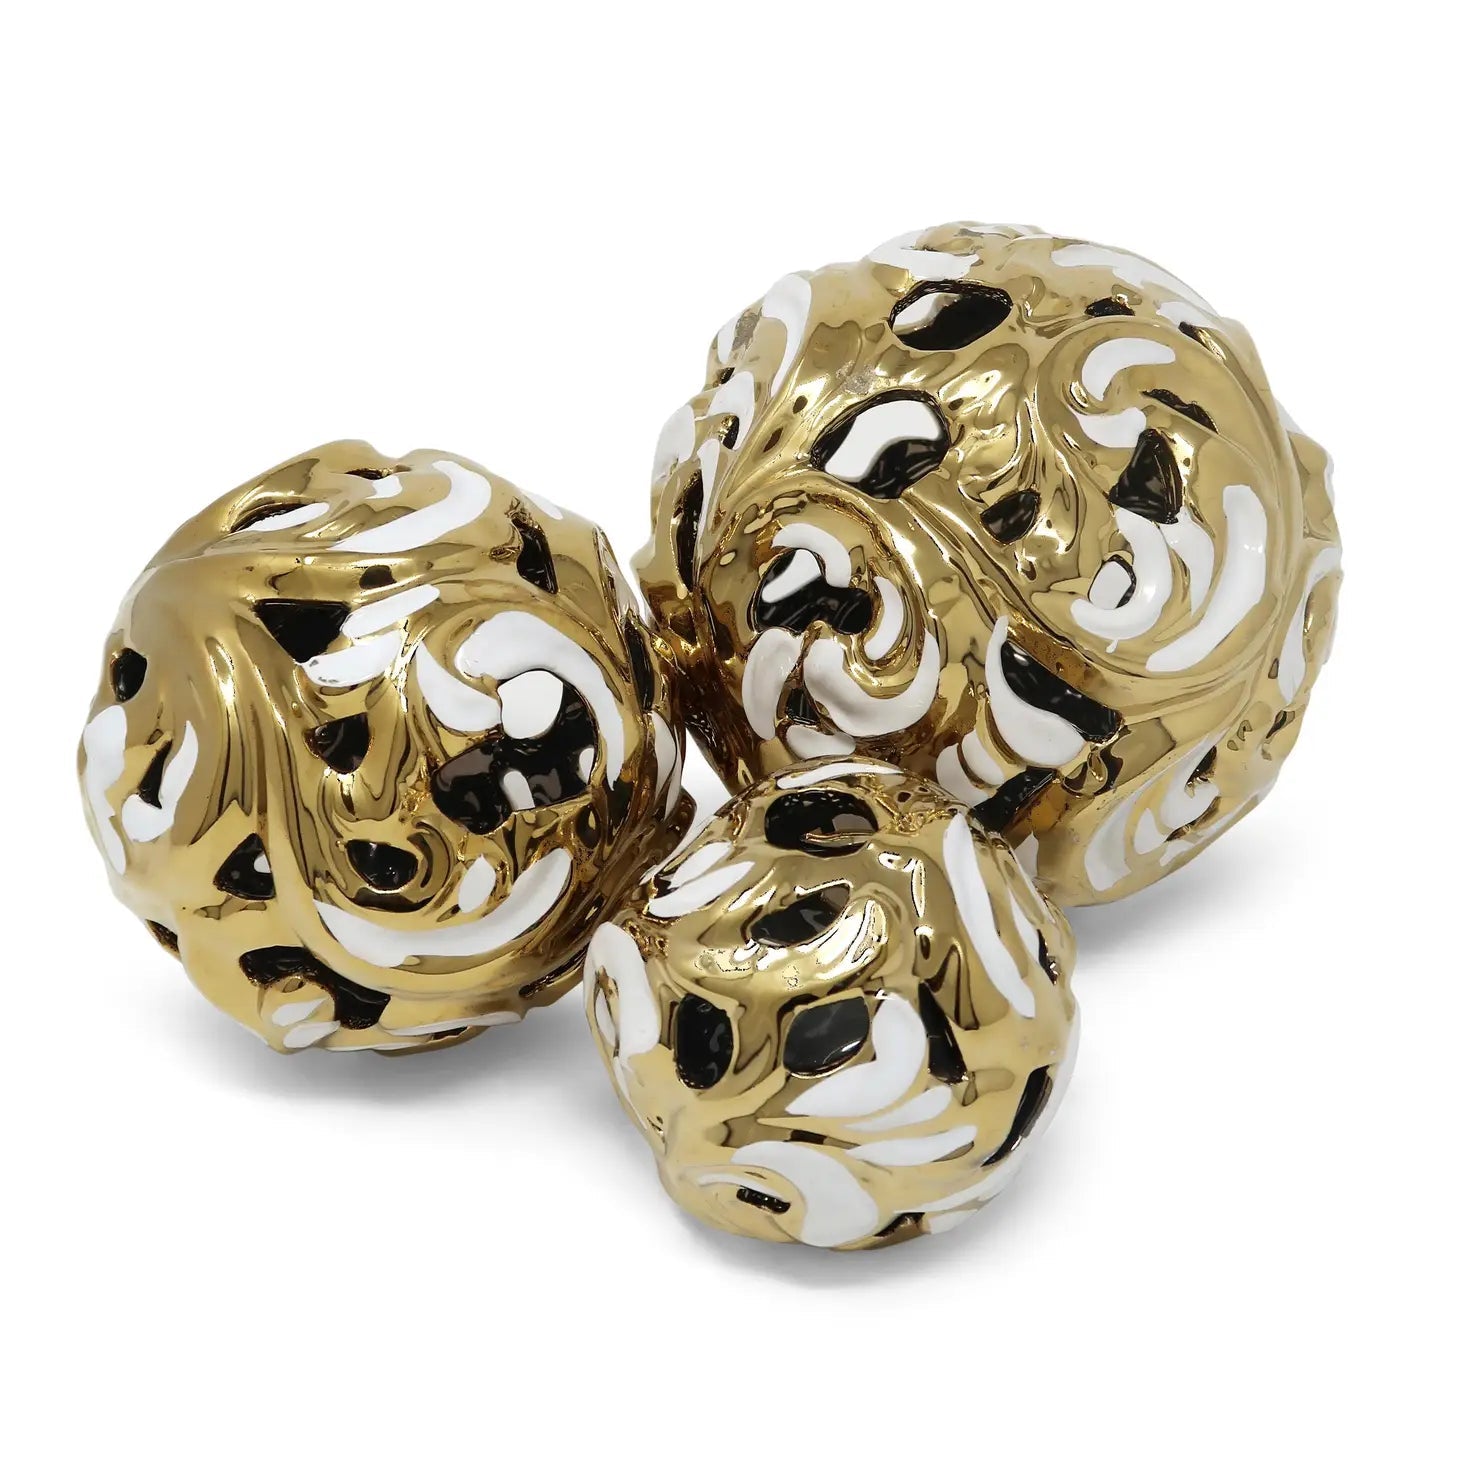 White and Gold Decorative Ball High Class Touch - Home Decor Set of 3 